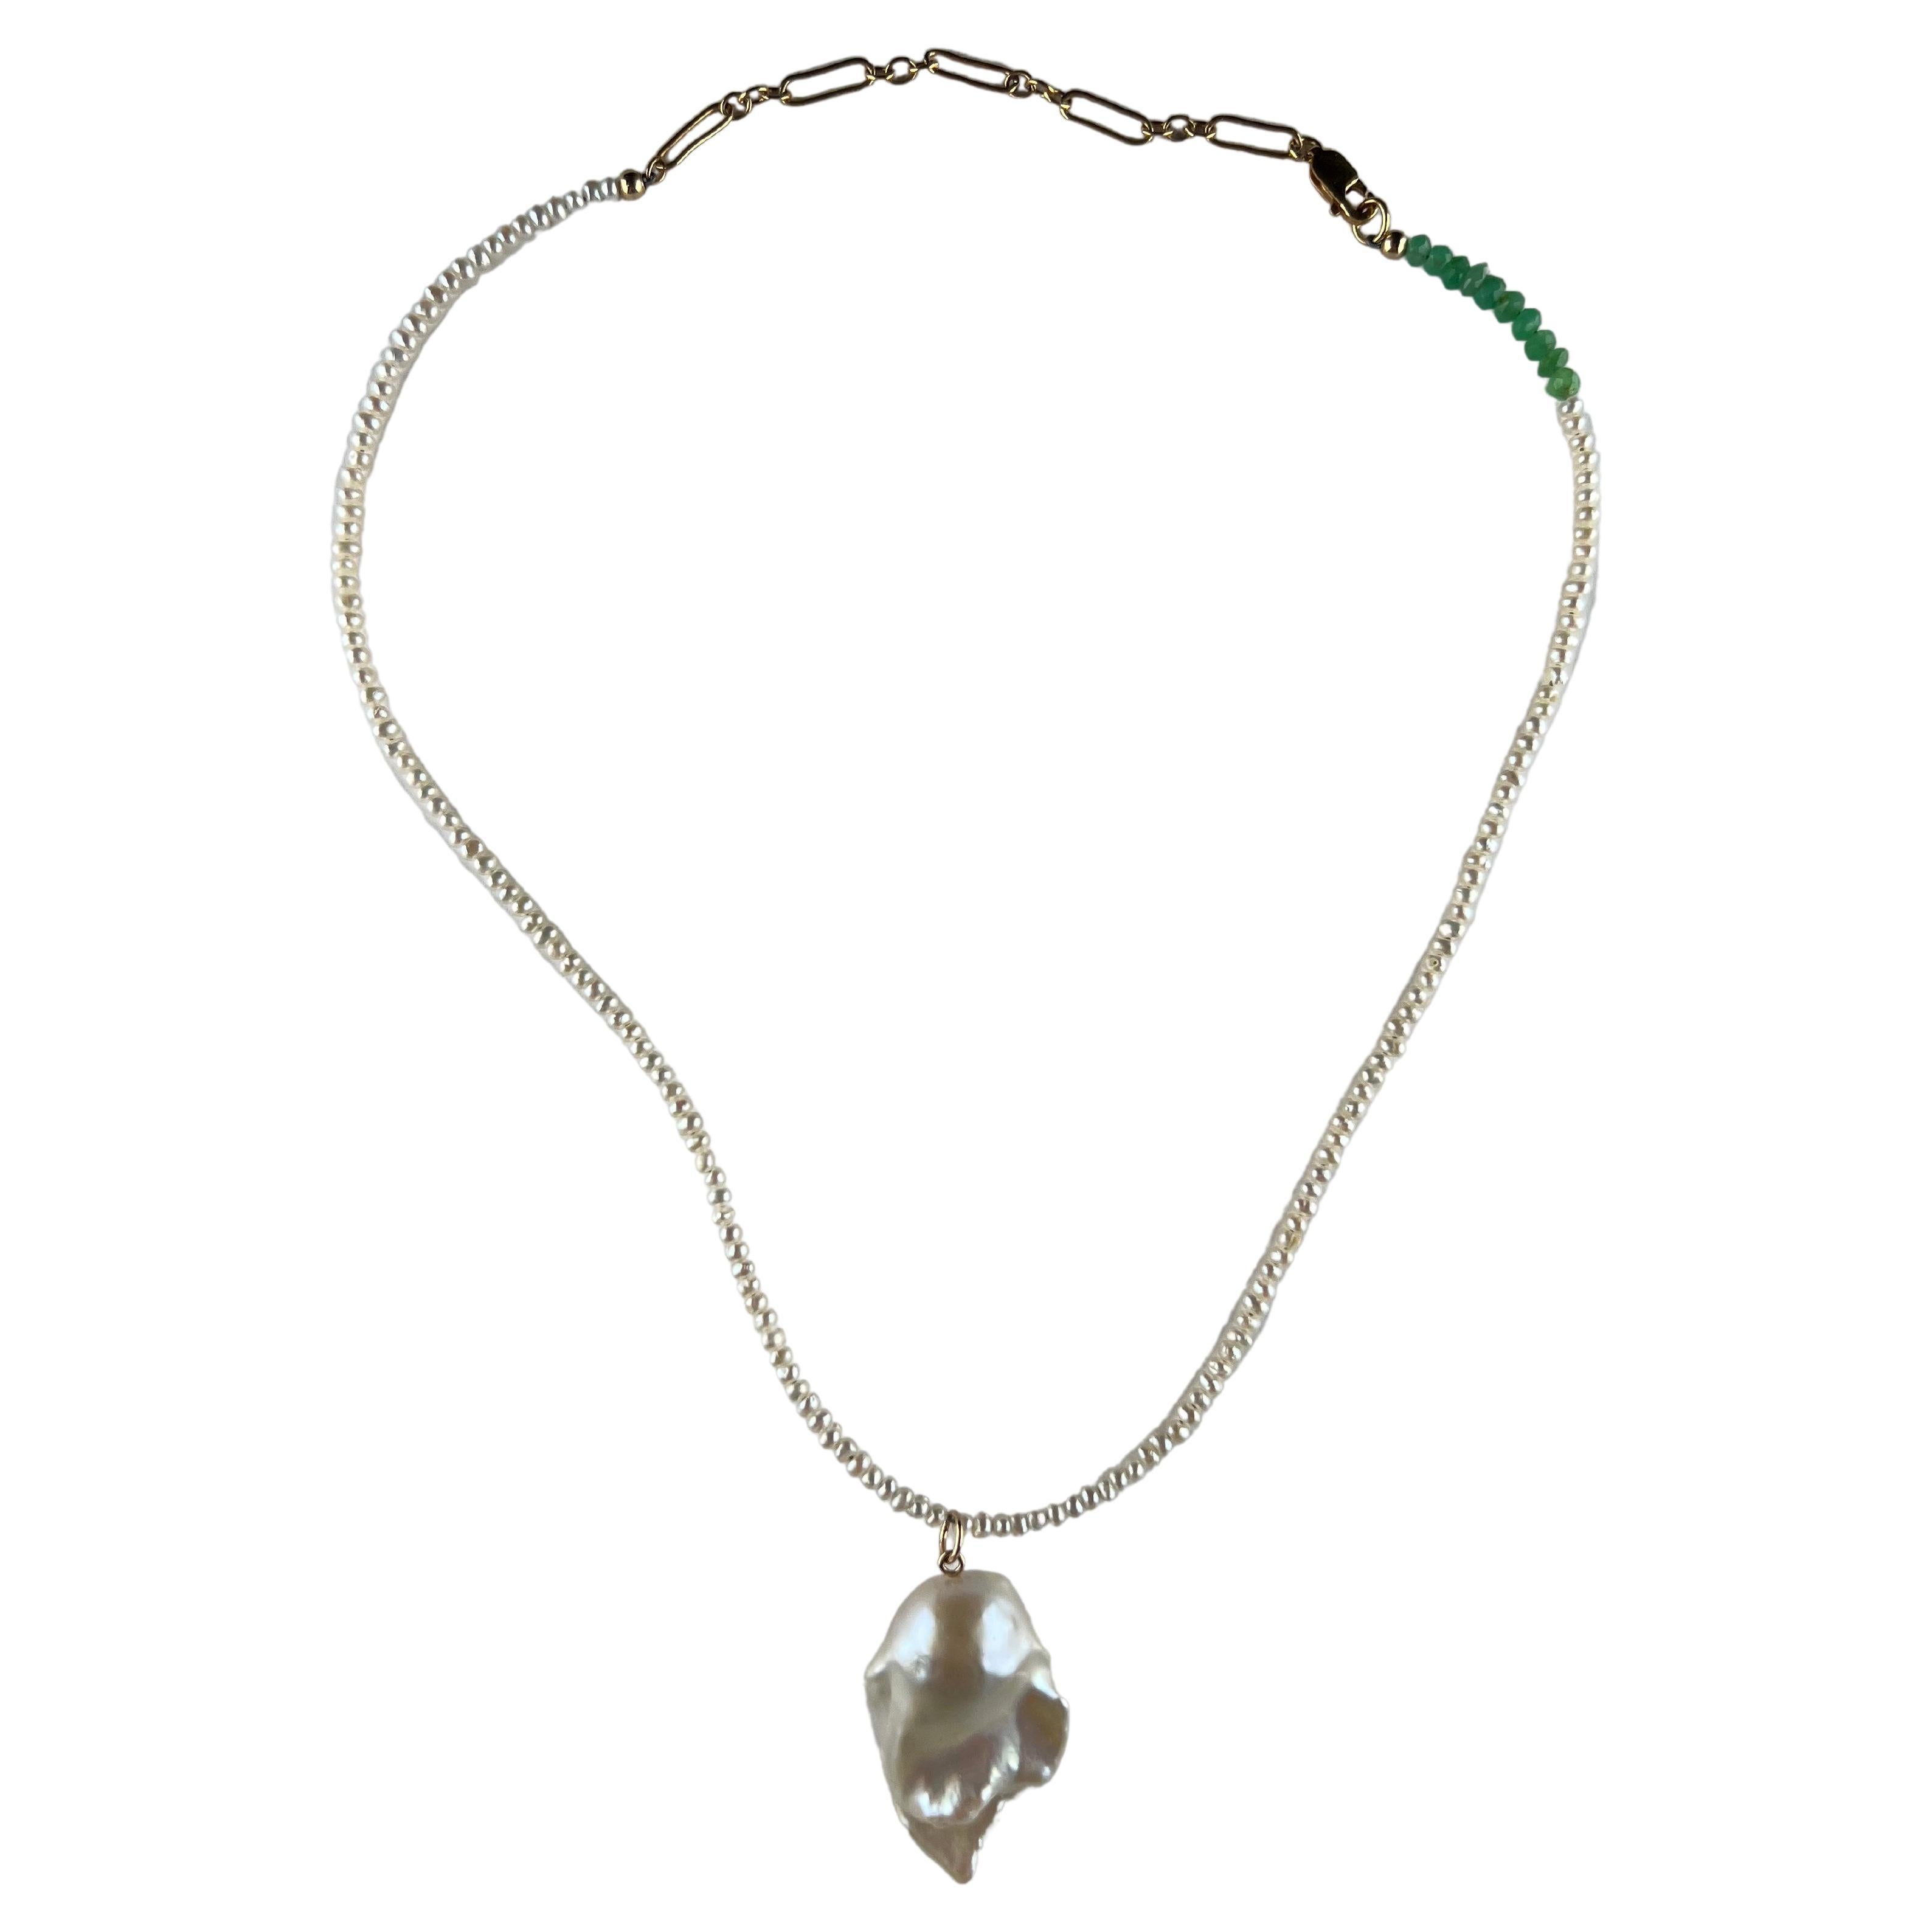 Large White Pearl Drop Pendant on a Pearl Chrysoprase Necklace that is 18